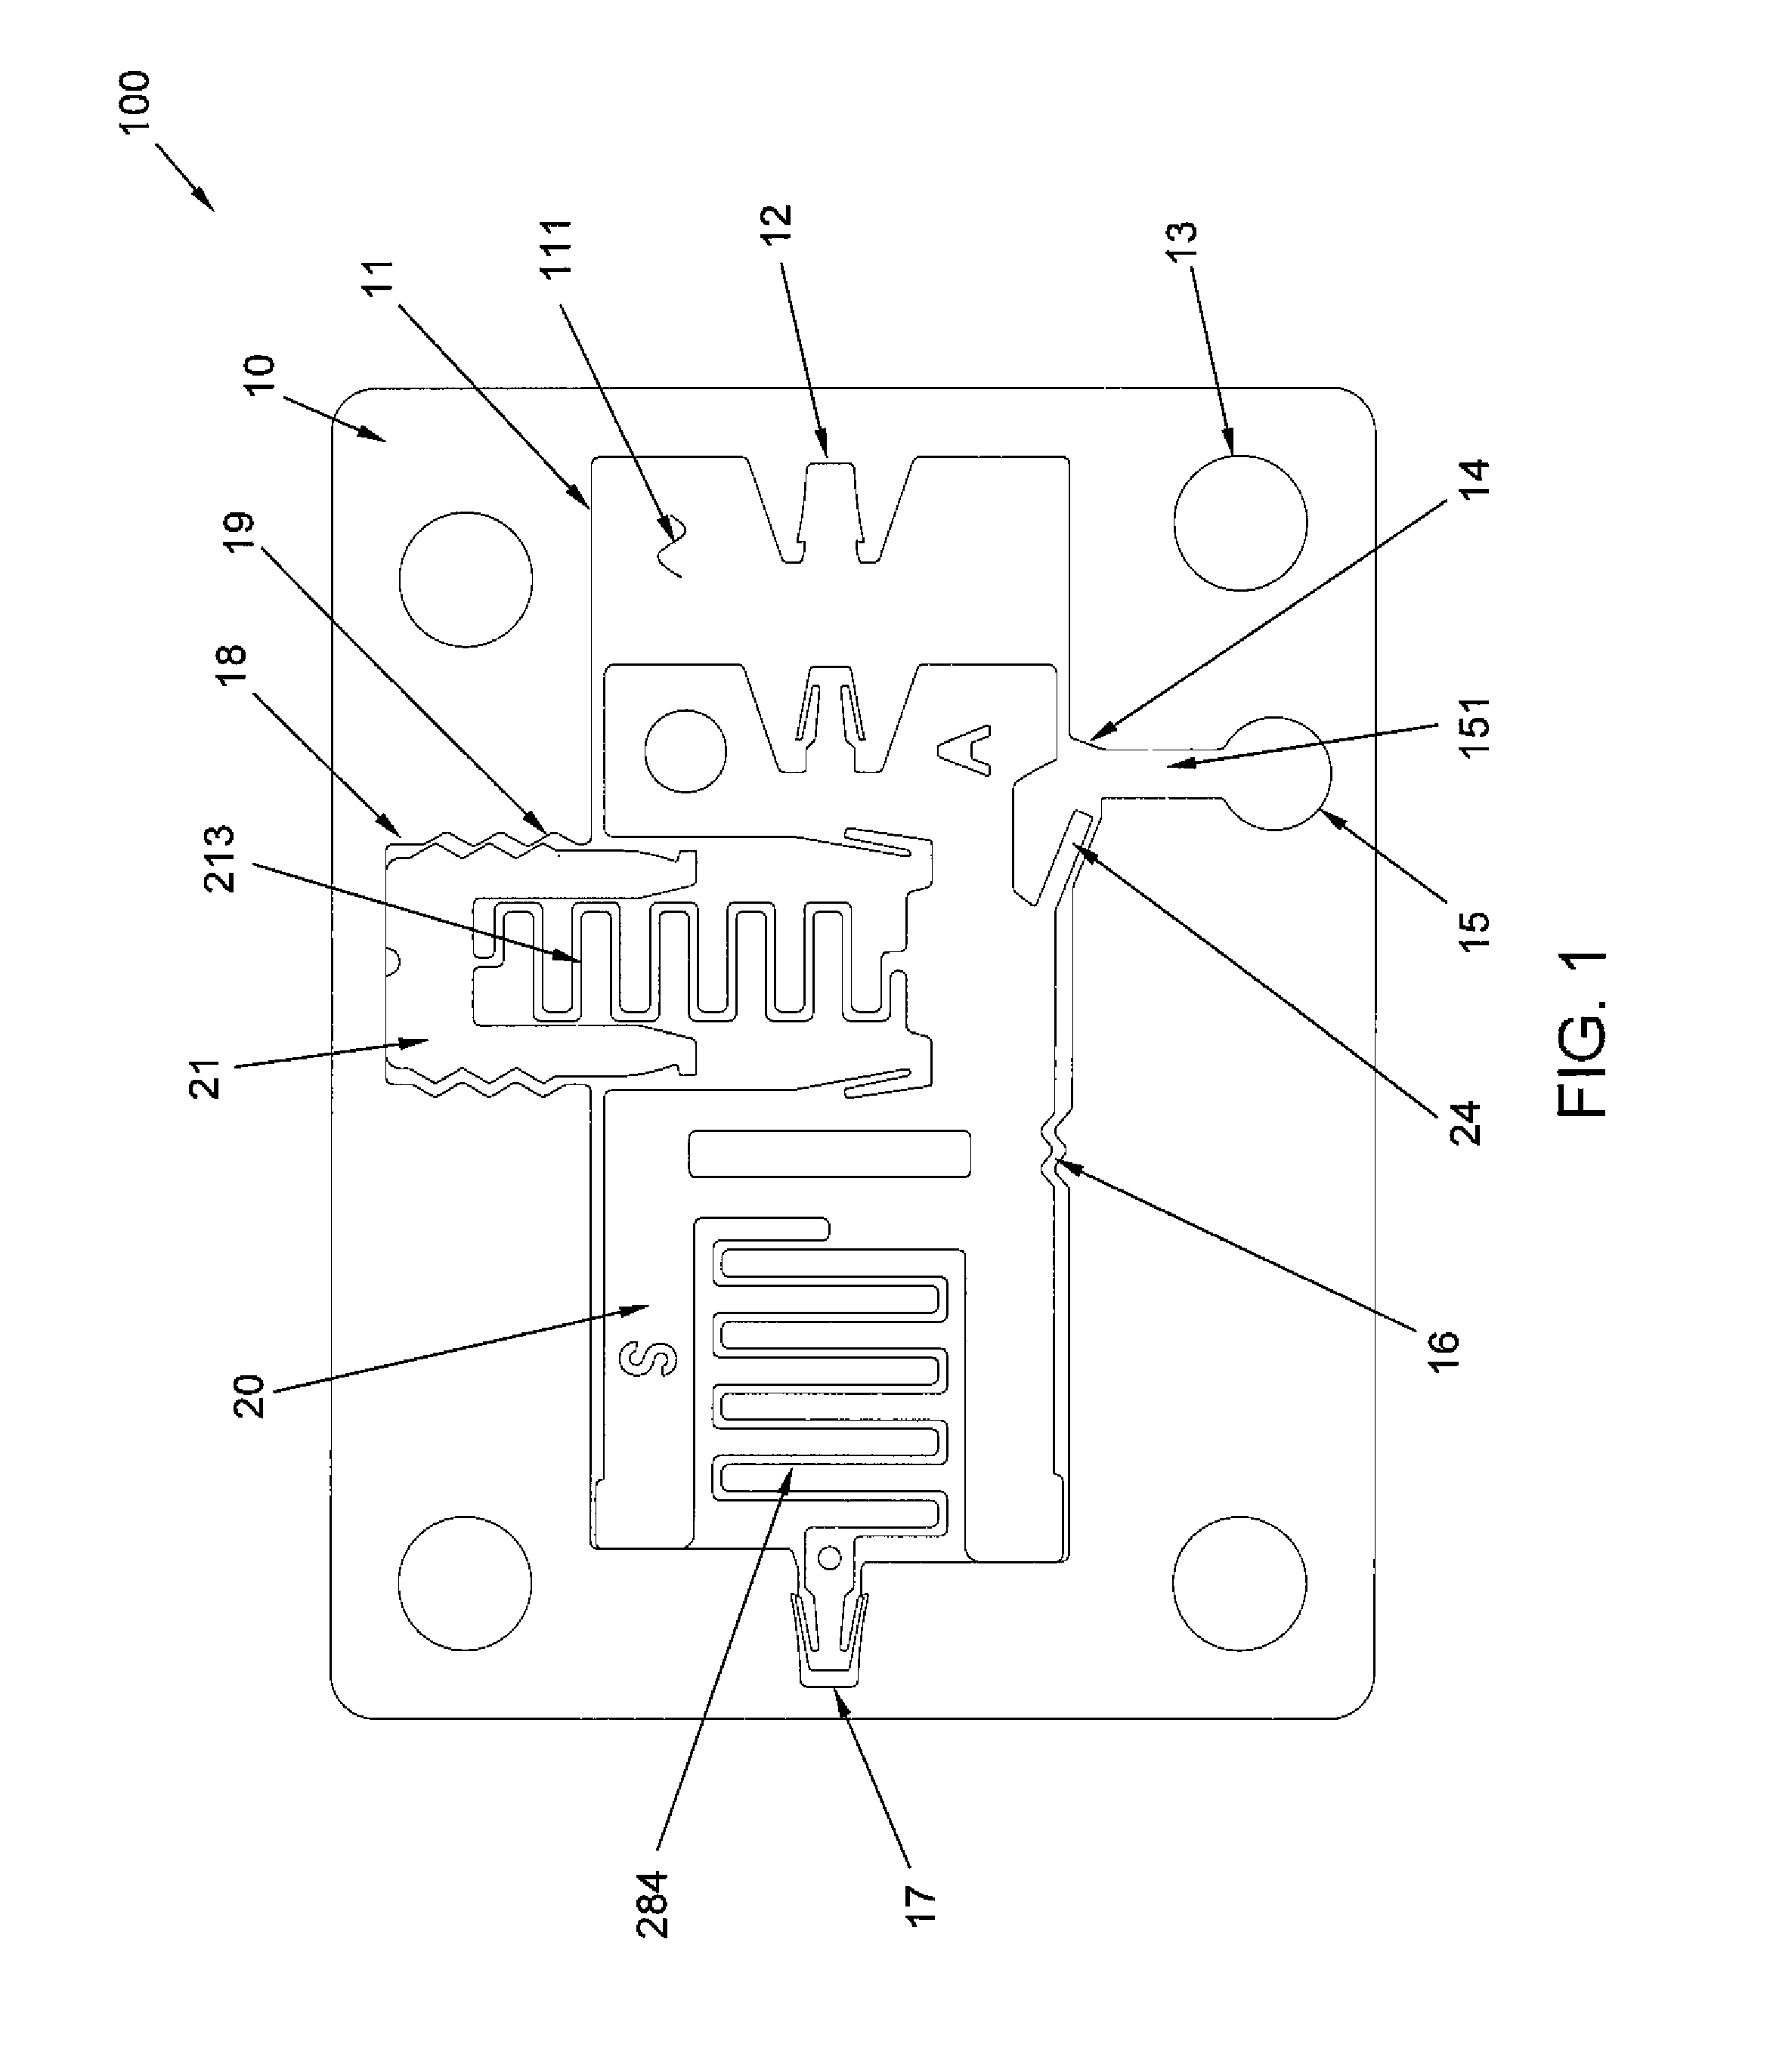 Ultra-miniature electro-mechanical safety and arming device